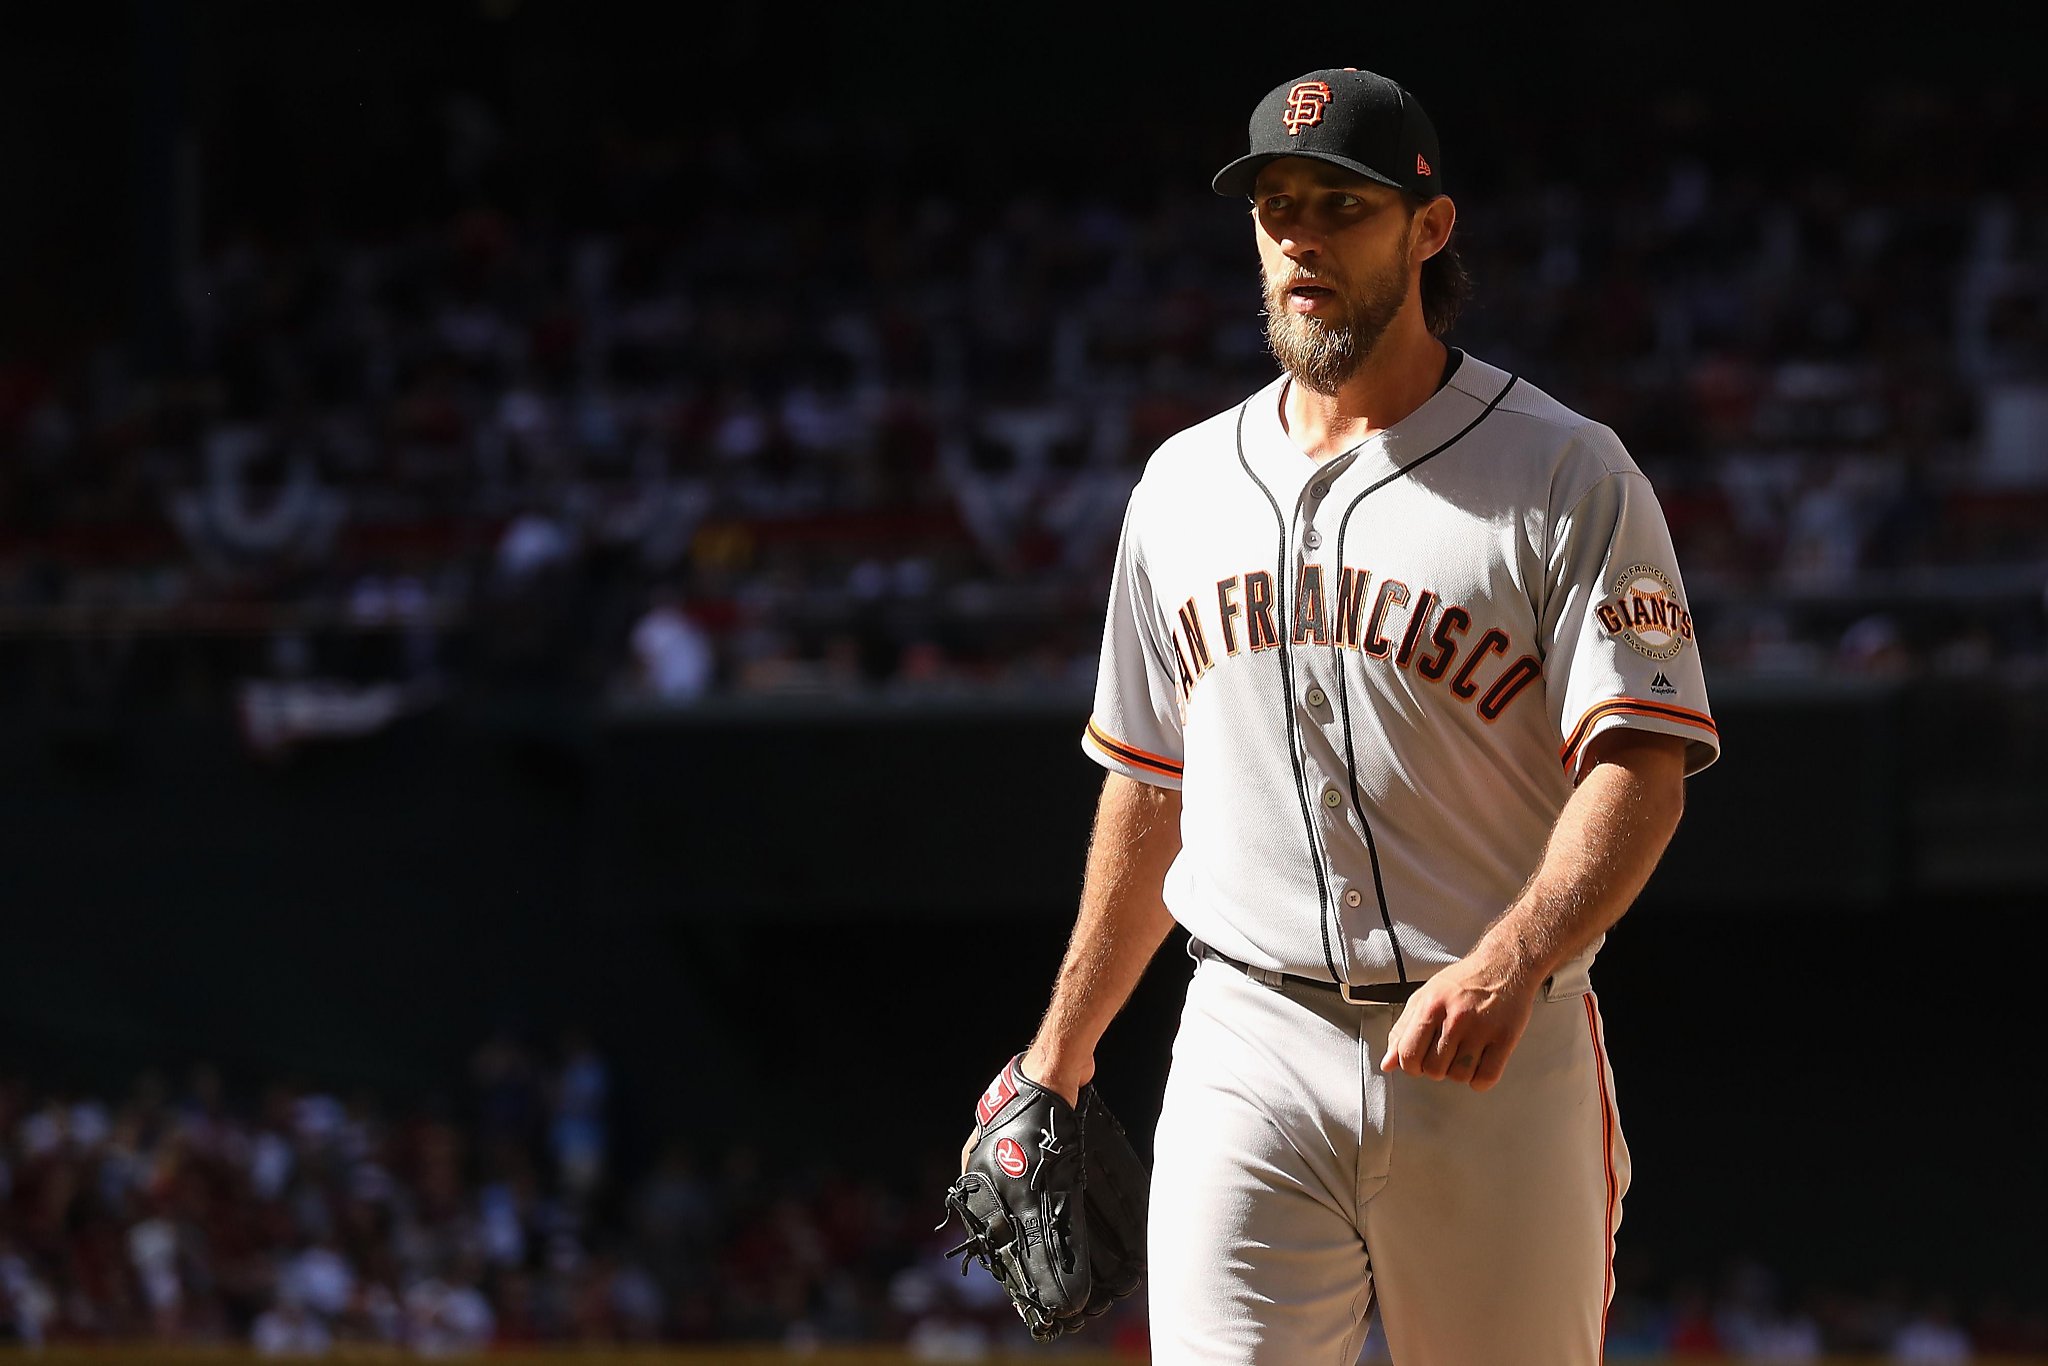 Giants see Bumgarner situation as different from Kent's - San Francisco Chronicle